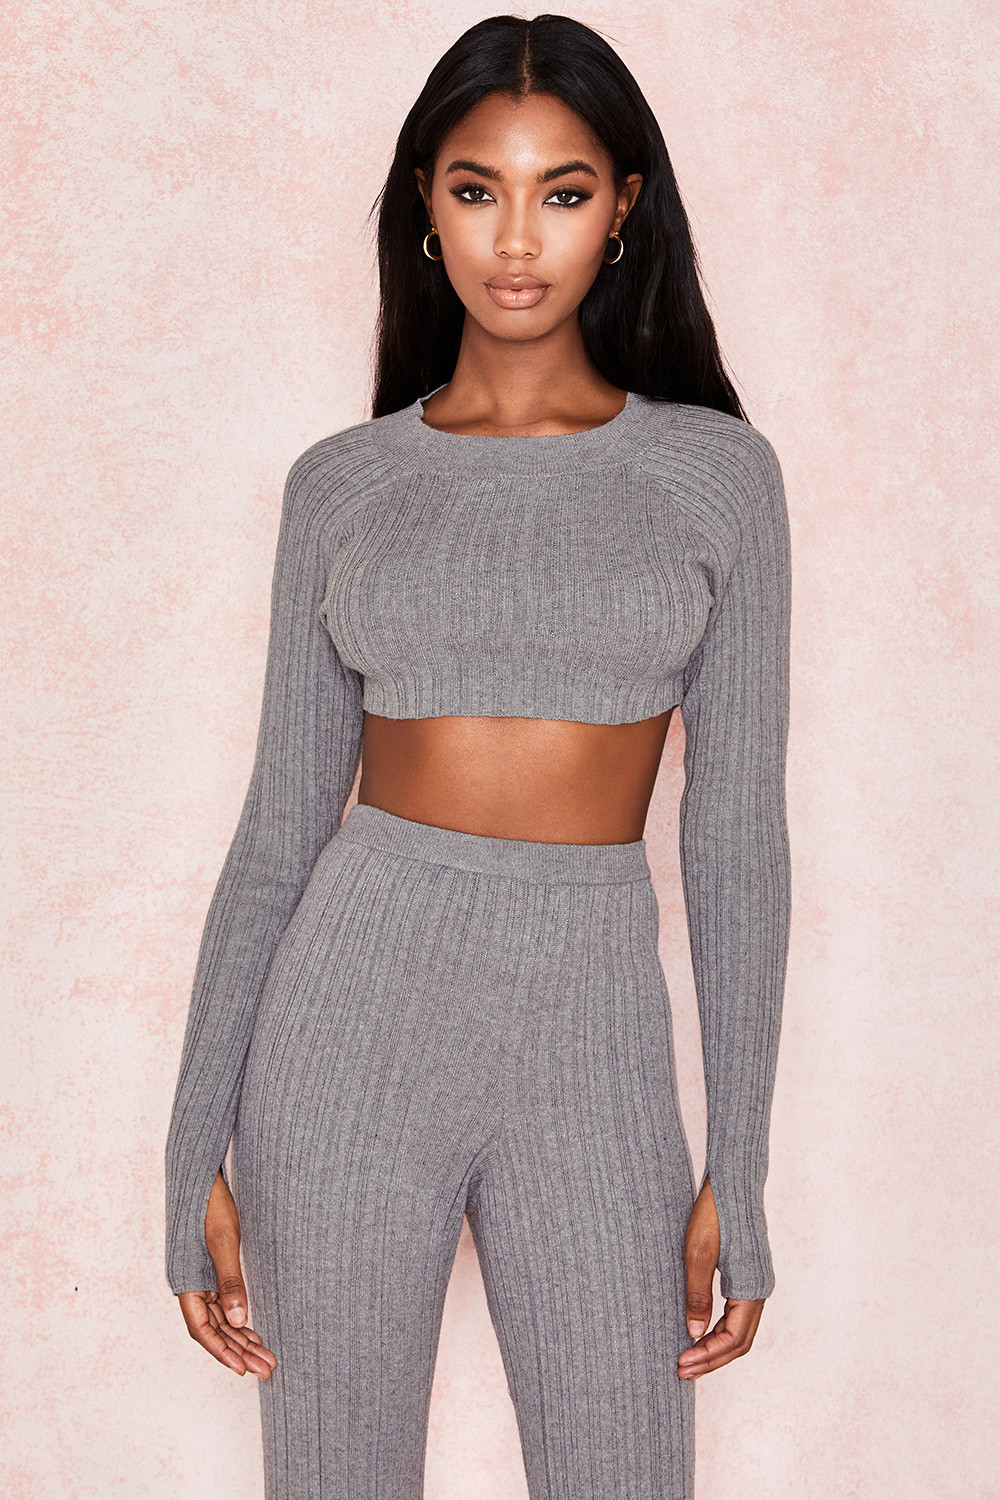 Clothing : Tops : 'Karlie' Grey Rib Knit Cropped Sweater